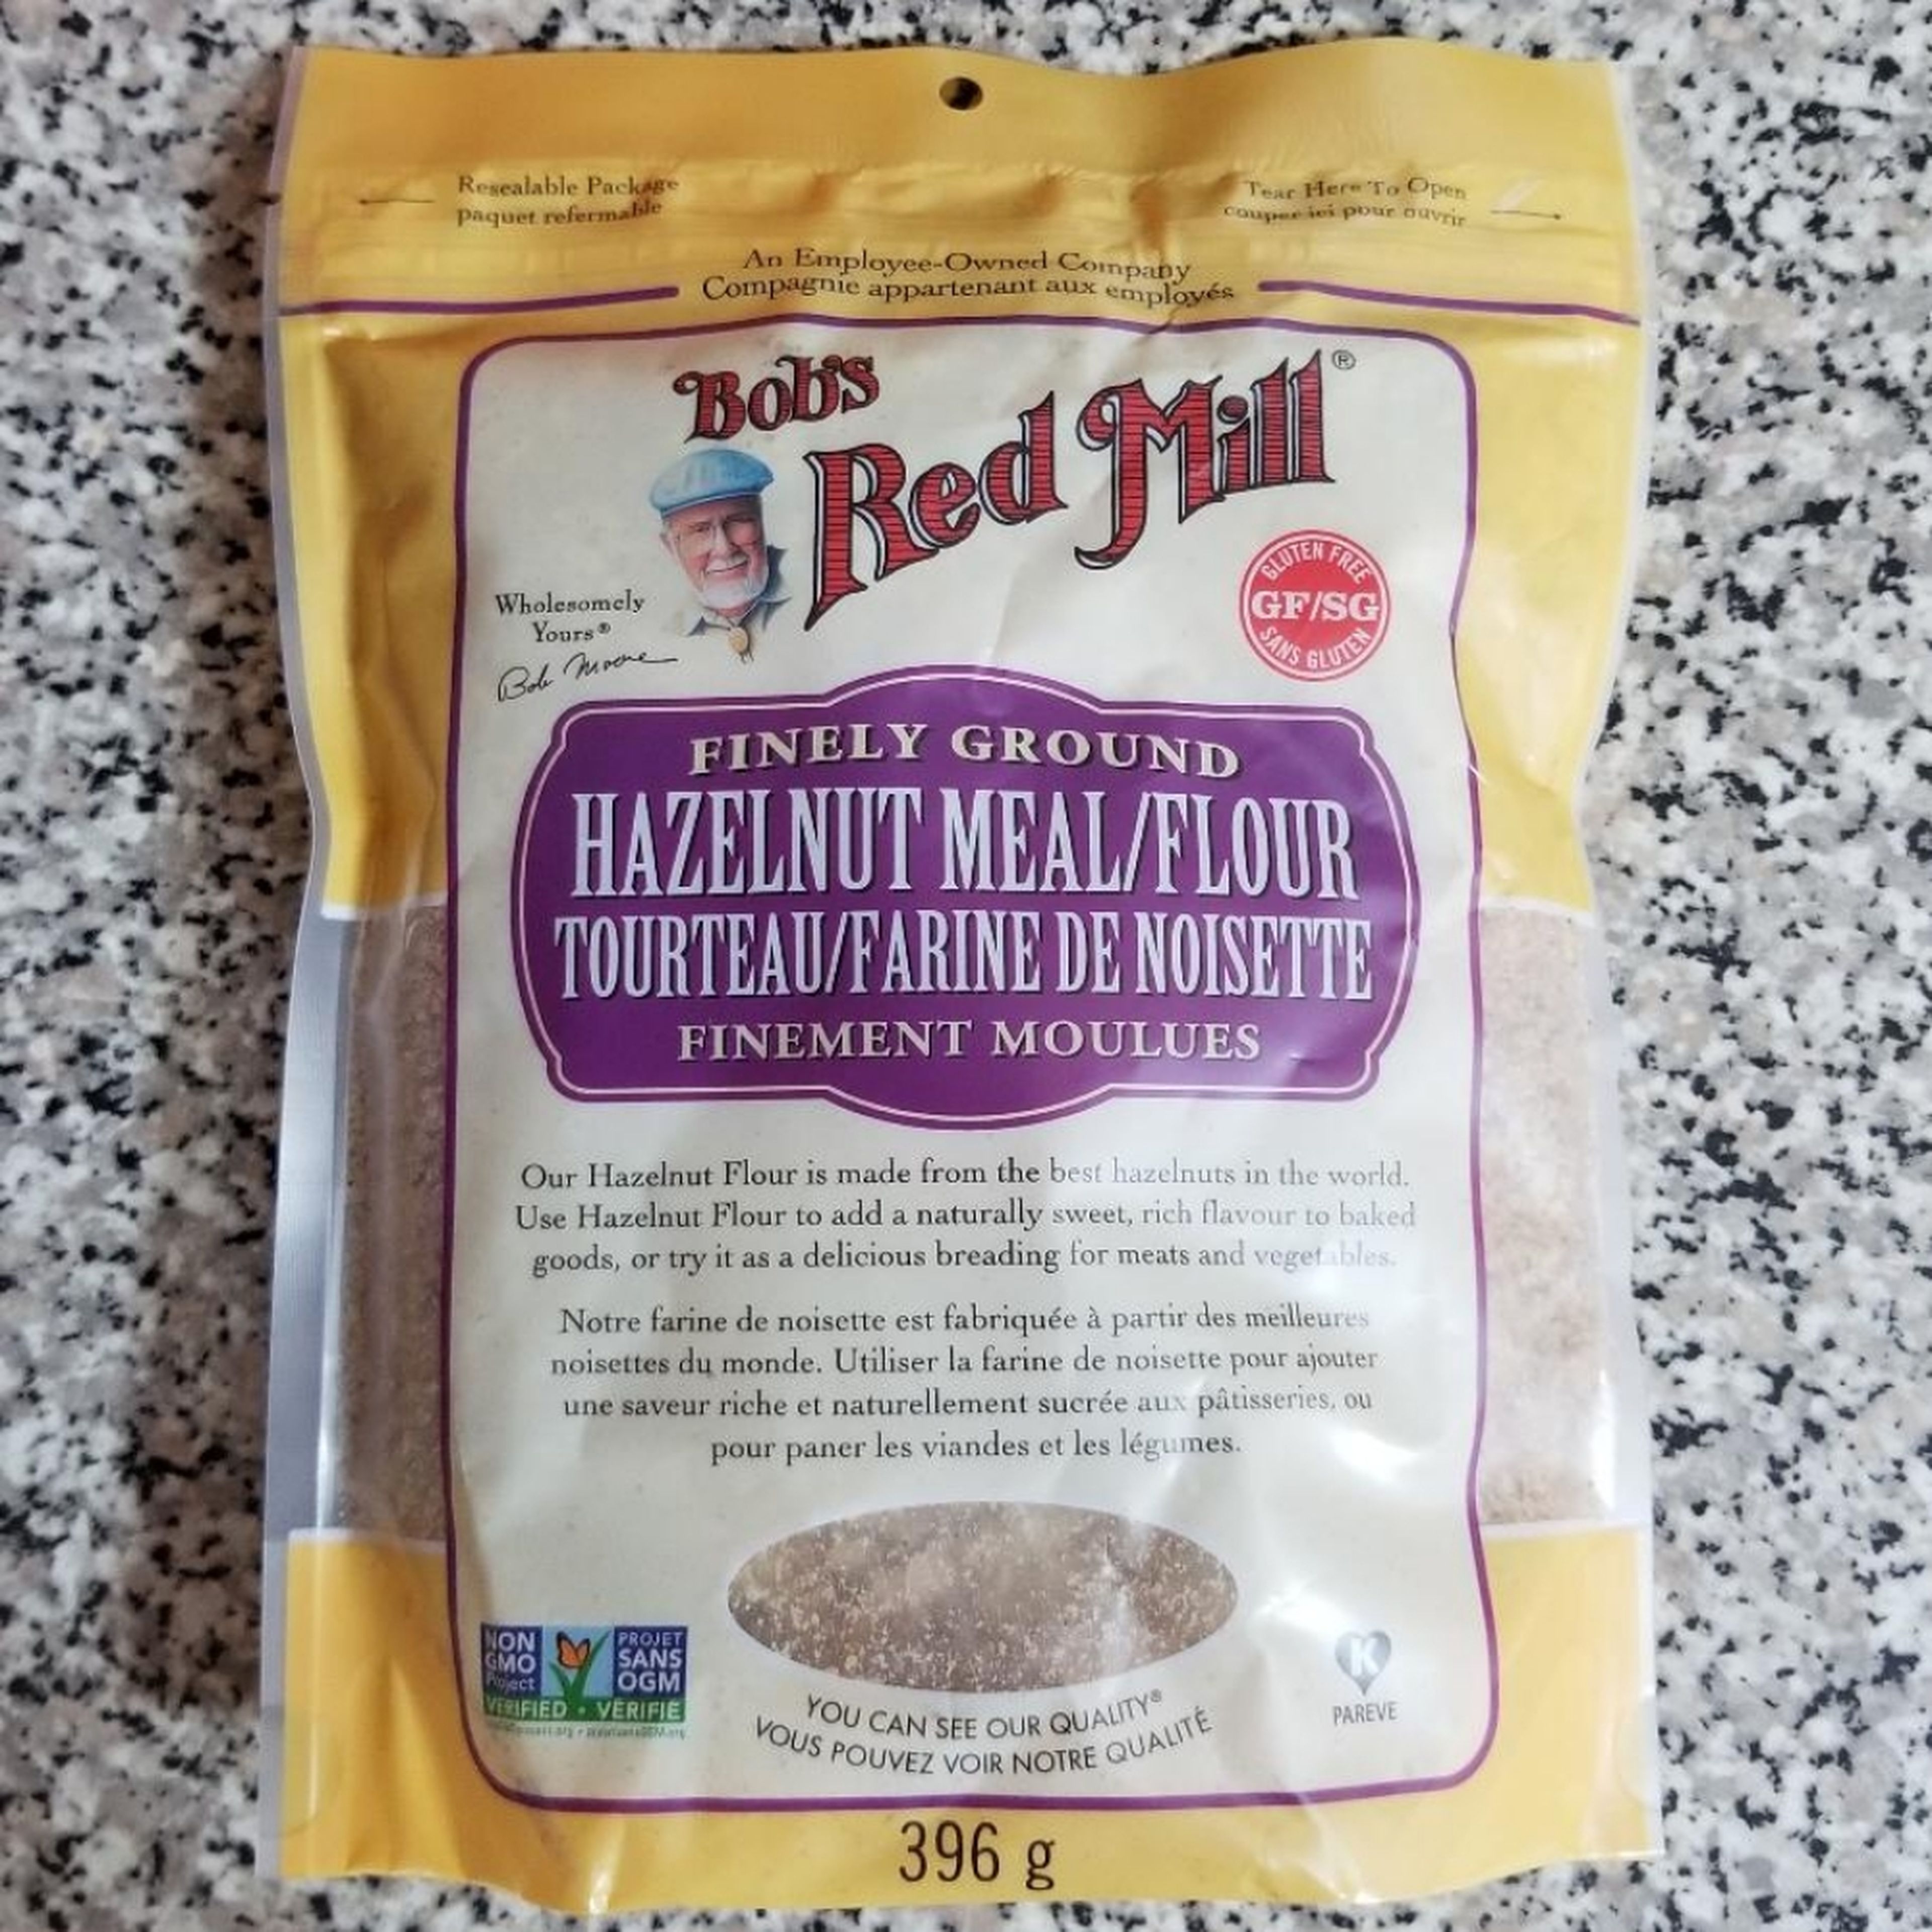 Add 50g hazelnut meal to mixing bowl. I get this from Whole Foods. If you don't have it, just add extra 50g almond flour instead.